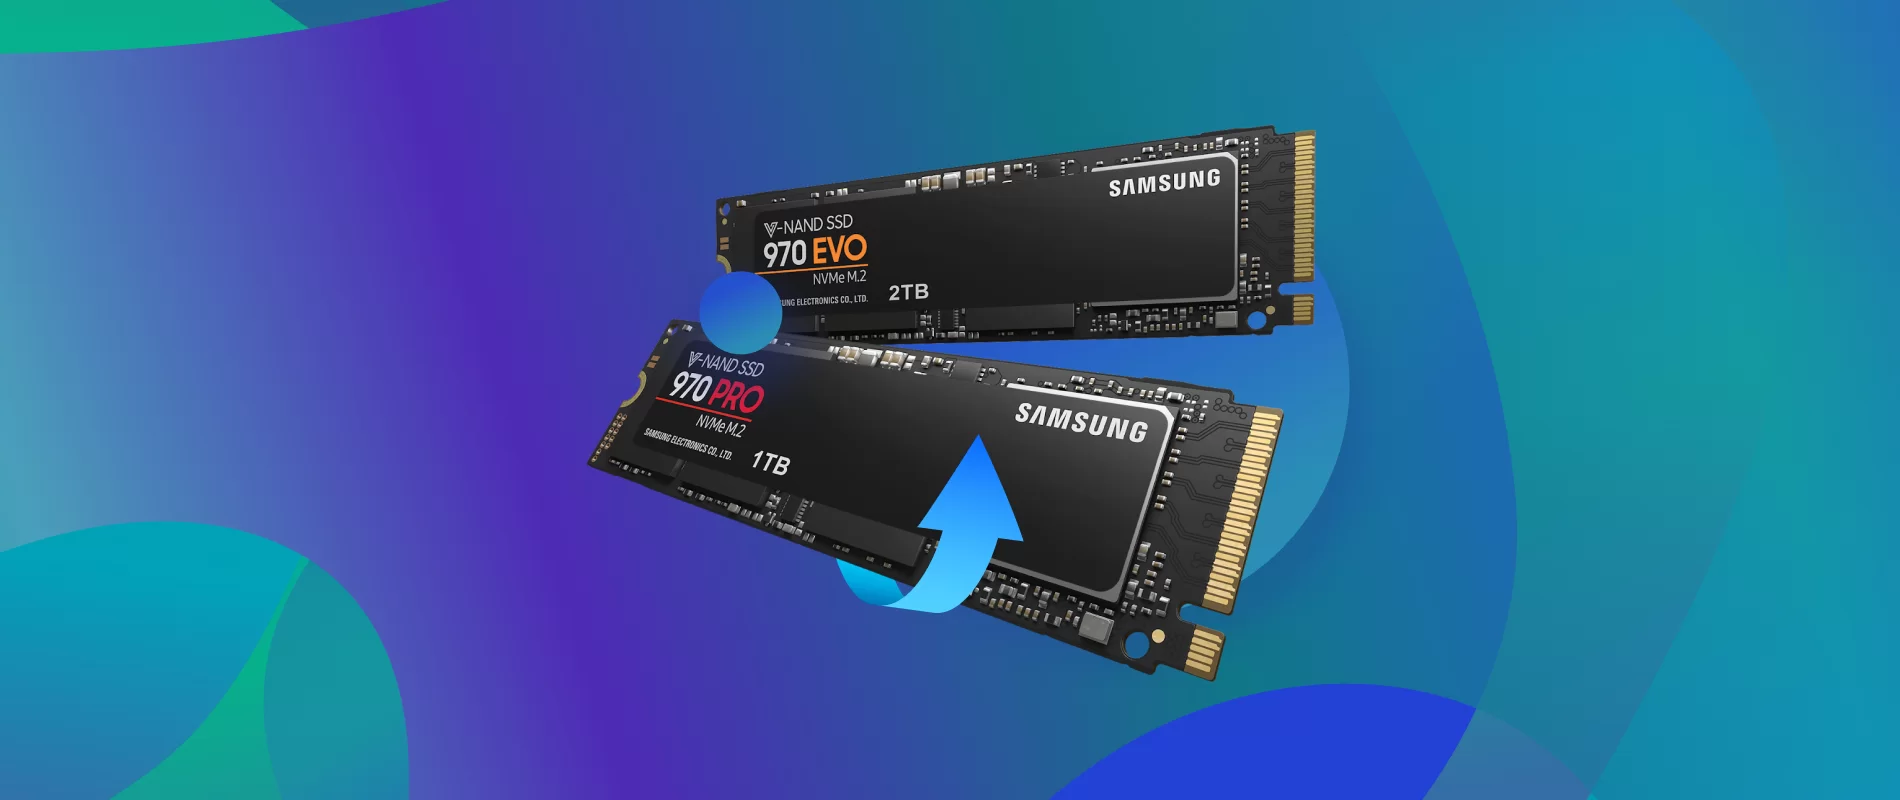 How To Partition Nvme SSD